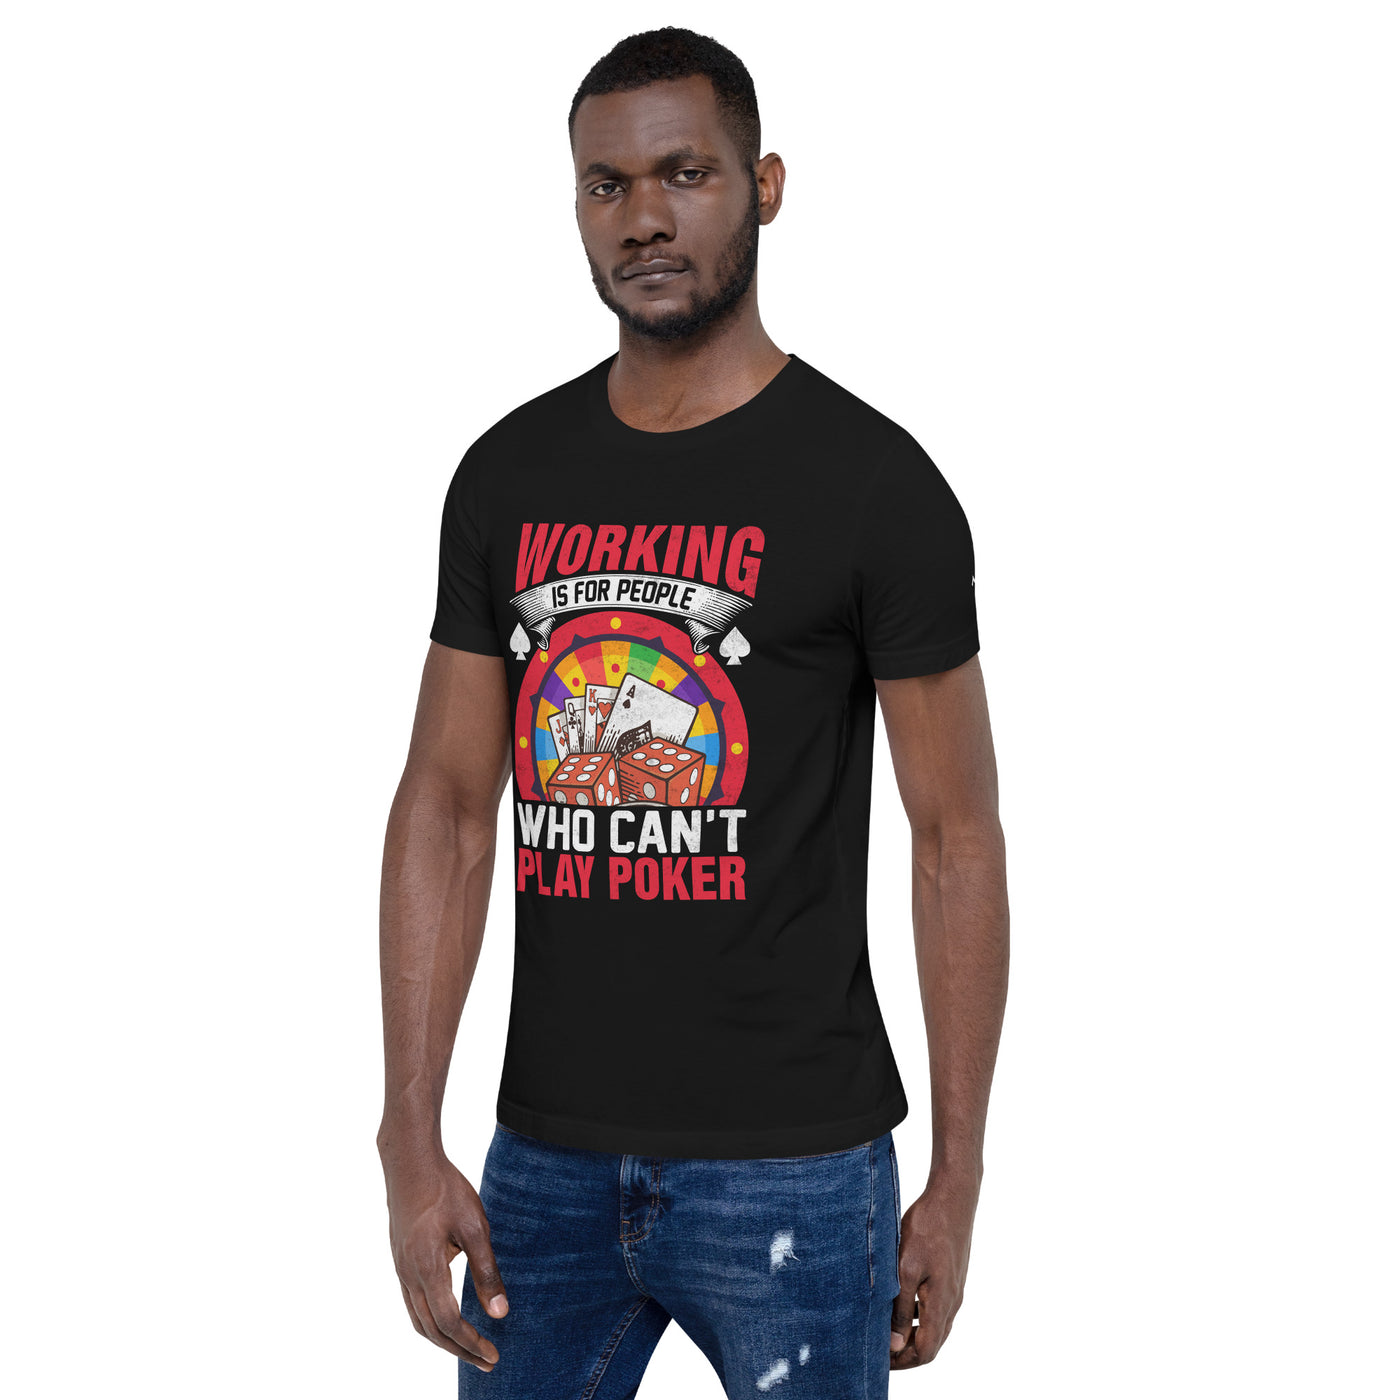 Working is for people for Who can't Play Poker - Unisex t-shirt